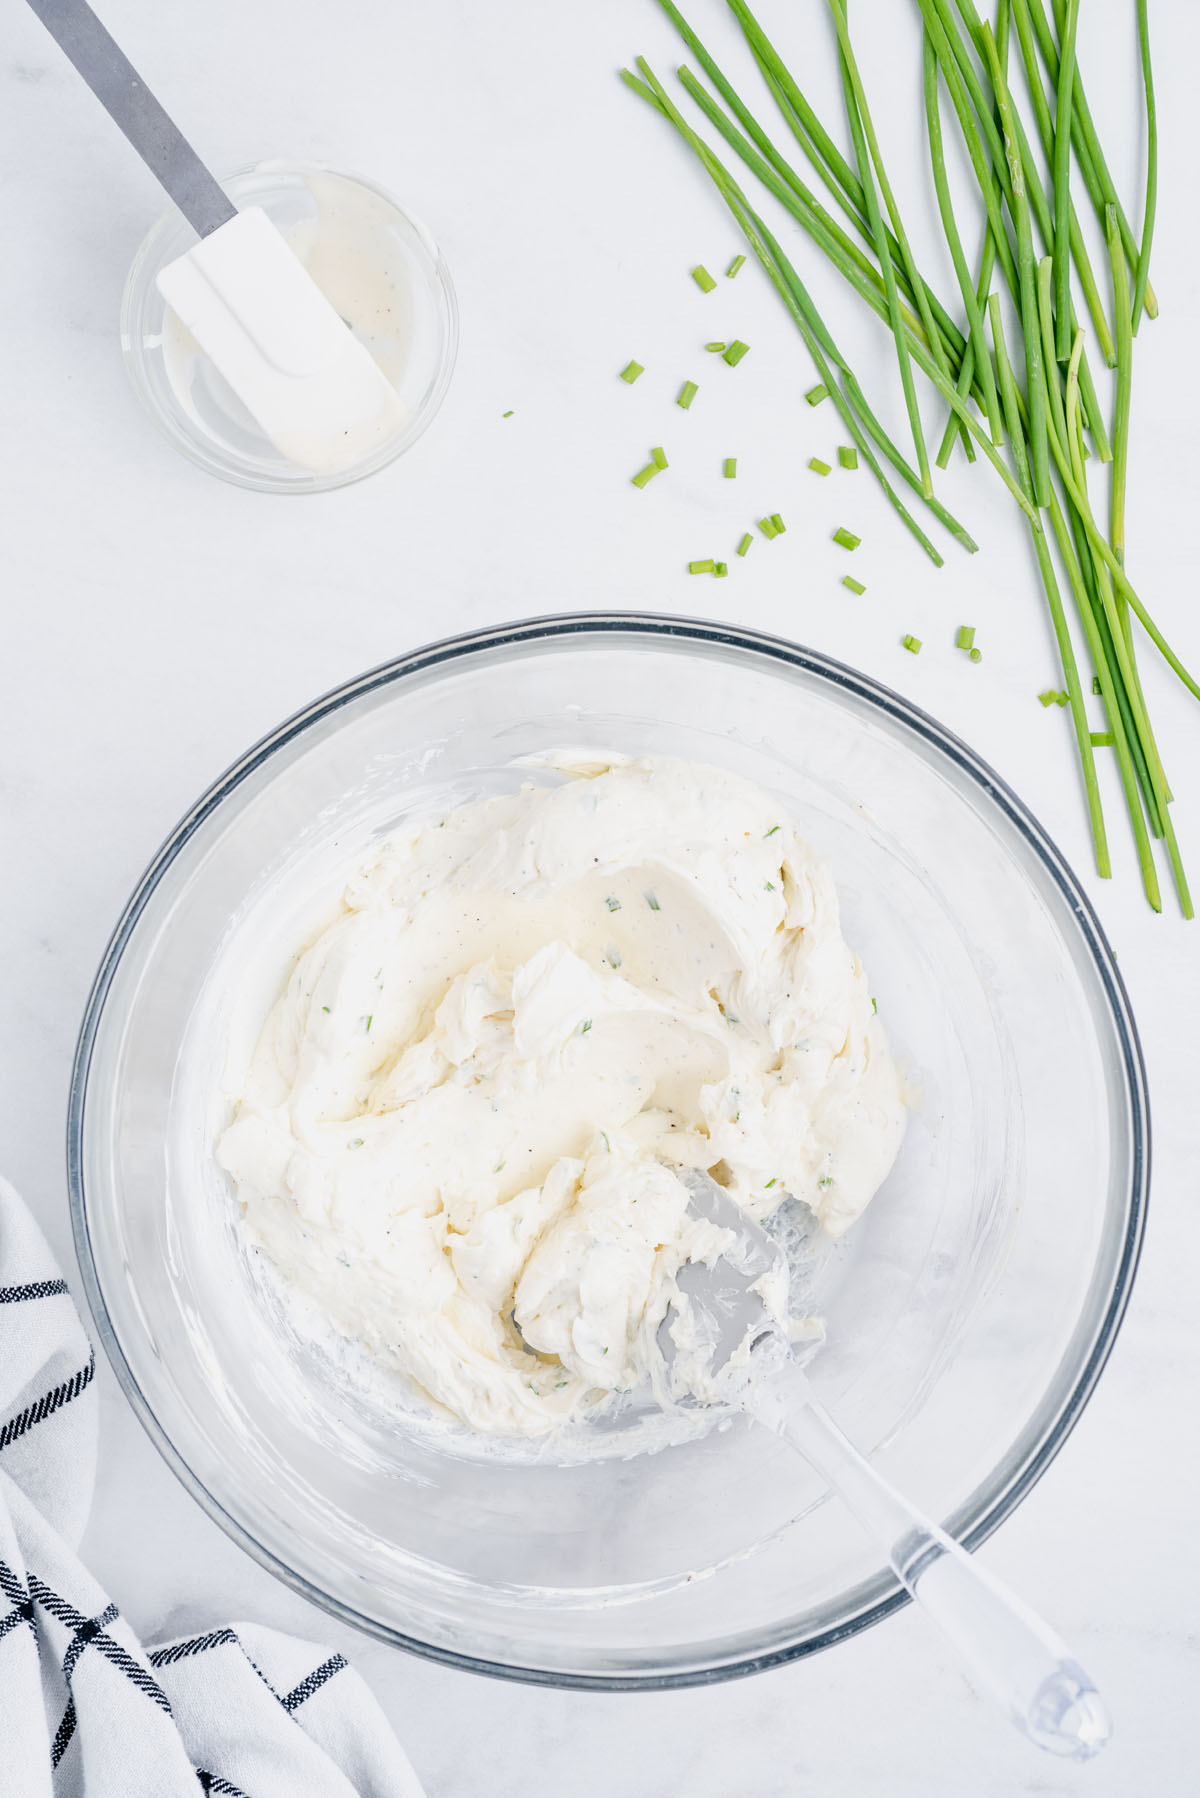 Cream together the cream cheese, ranch dressing, garlic powder, kosher salt, black pepper and chopped chives